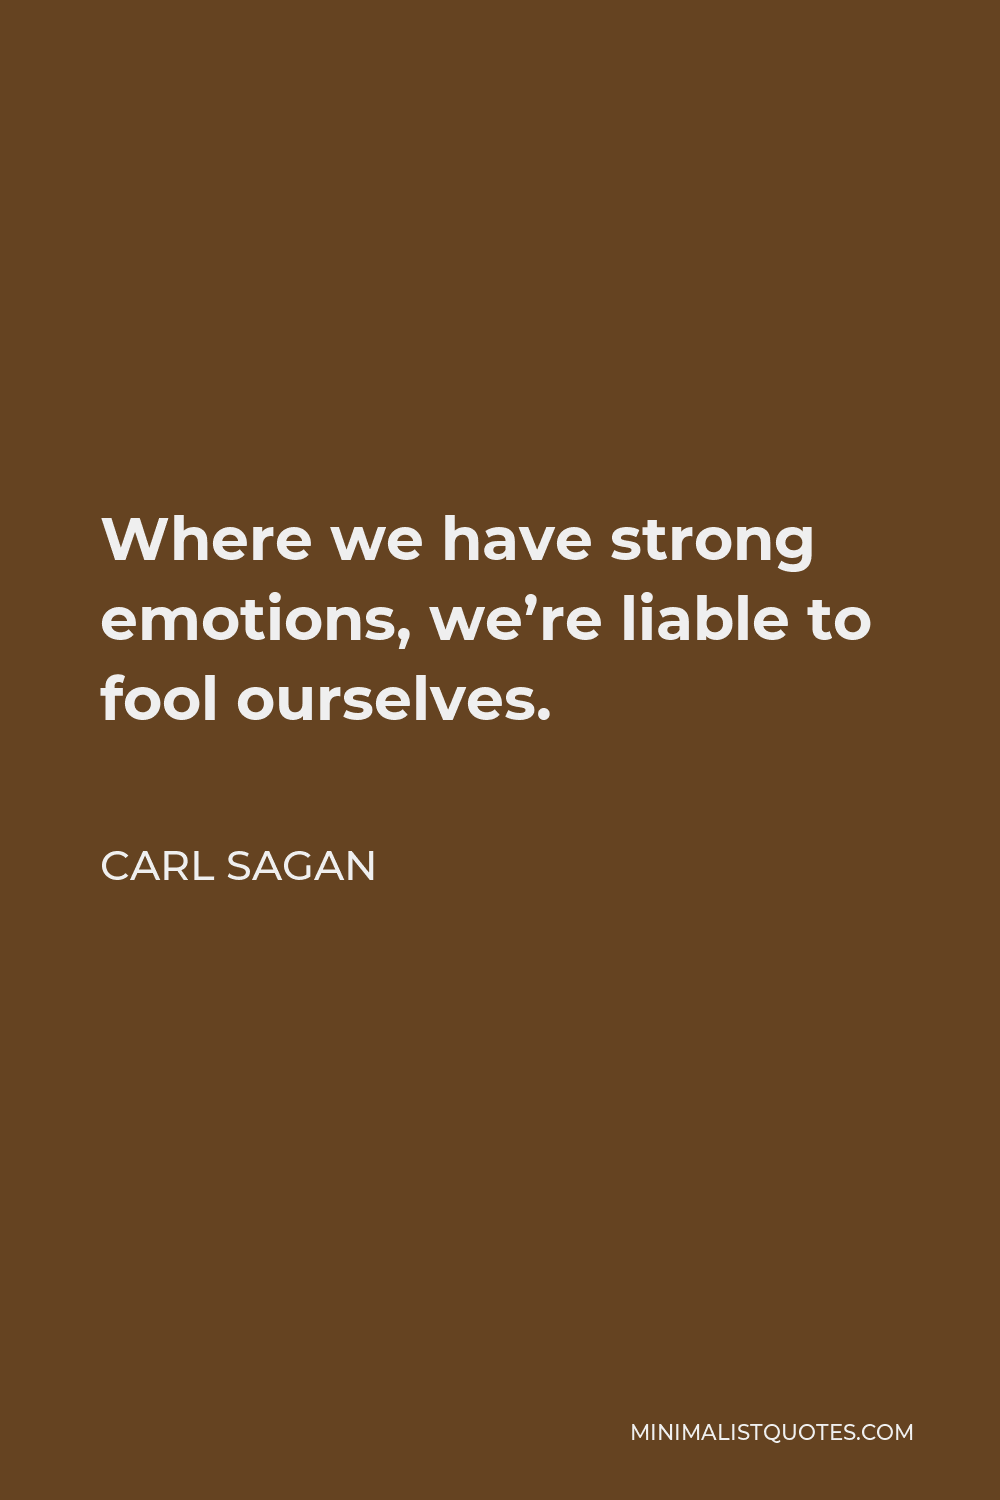 Carl Sagan Quote - Where we have strong emotions, we’re liable to fool ourselves.